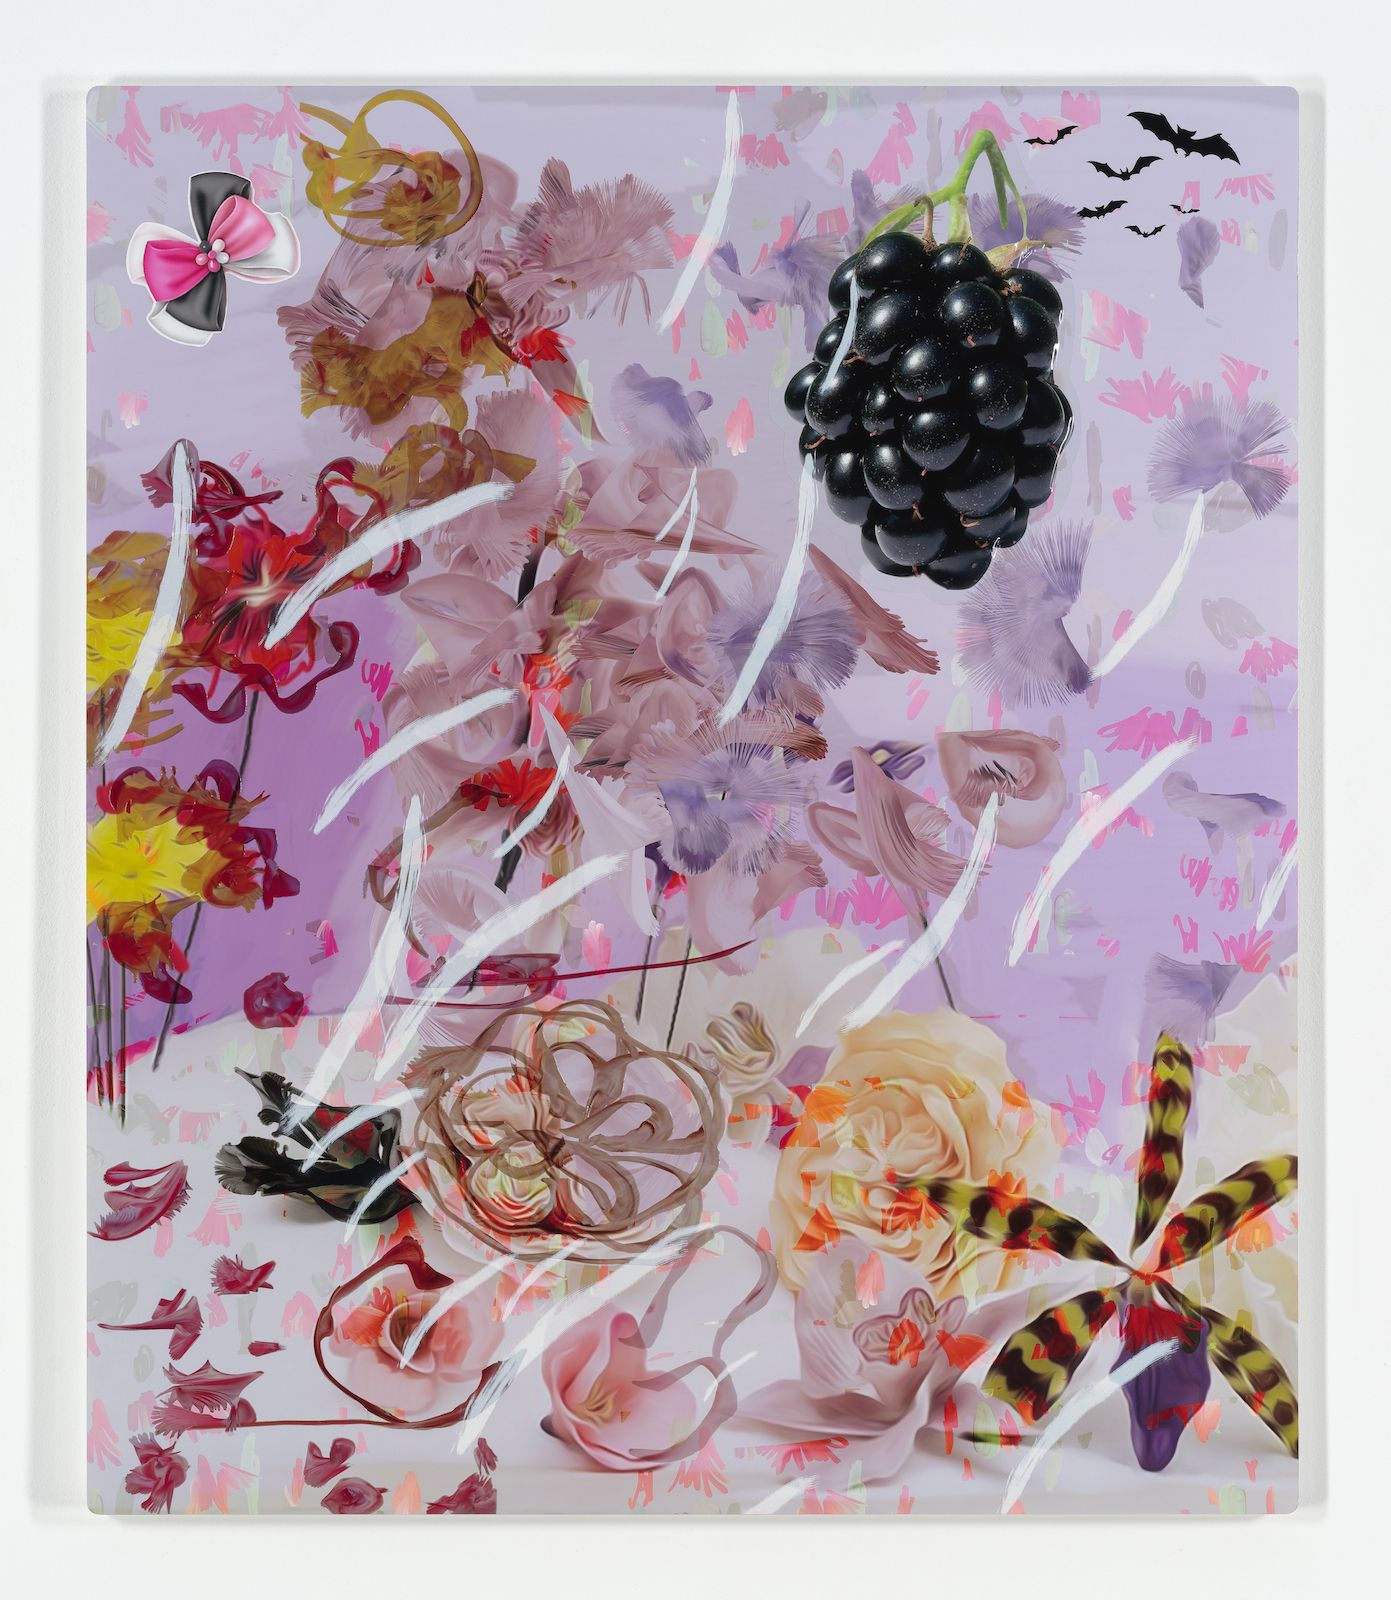 Petra Cortright, Andro-6 greeting cards, 2015, digital painting, duraflex, 3D print, UV print and stickers mounted on acrylic, 49 × 42 × 1 in.